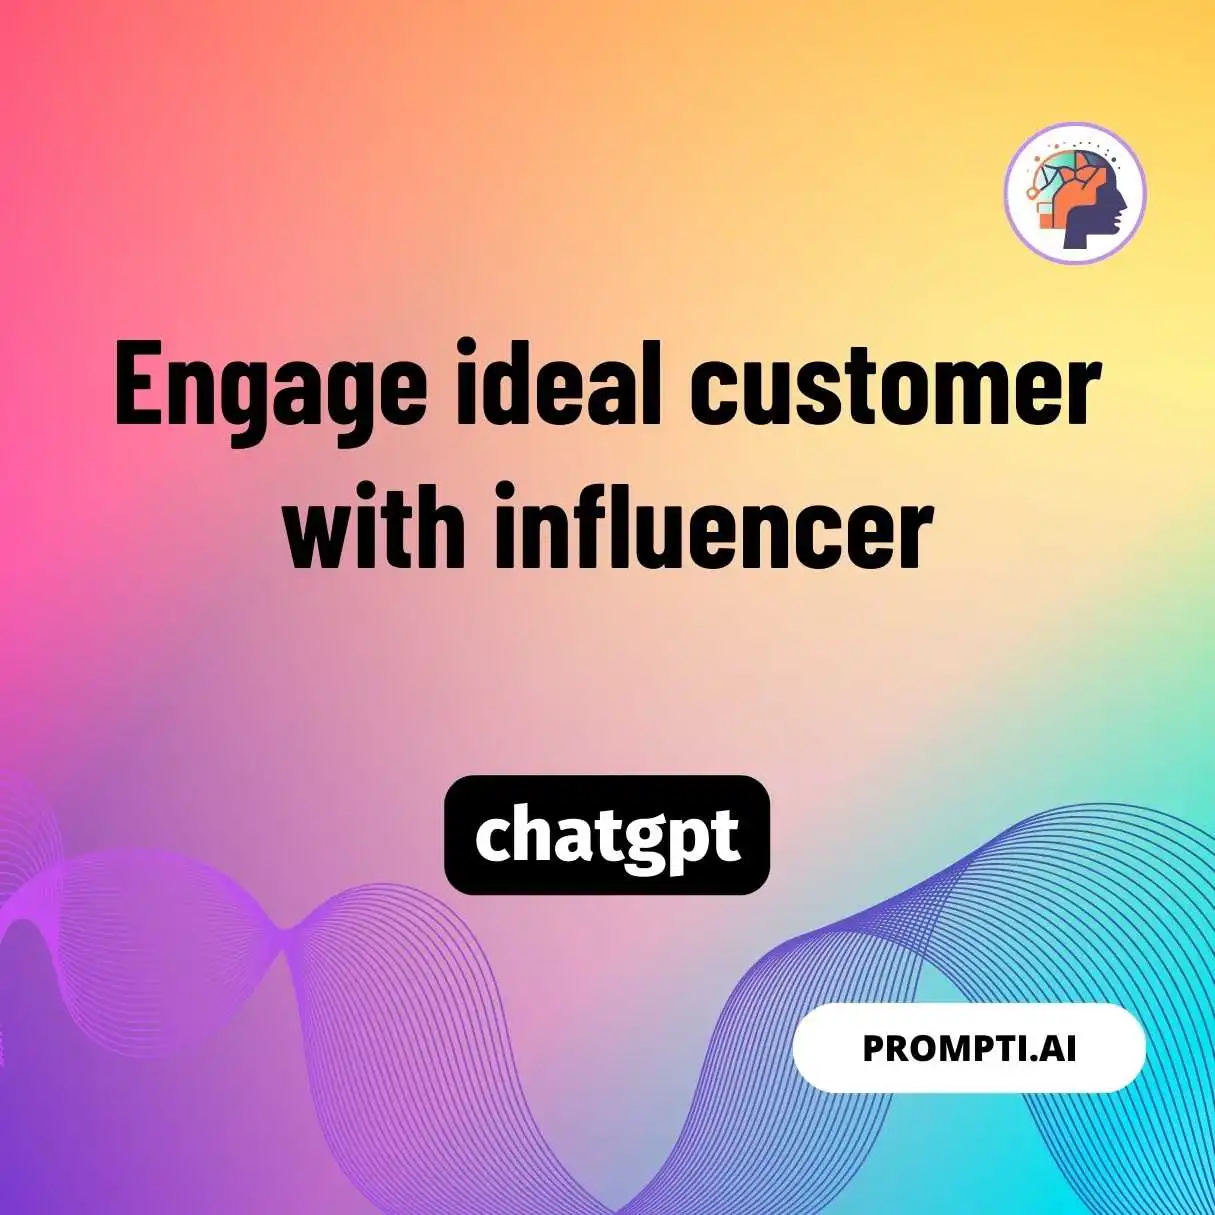 Engage ideal customer with influencer